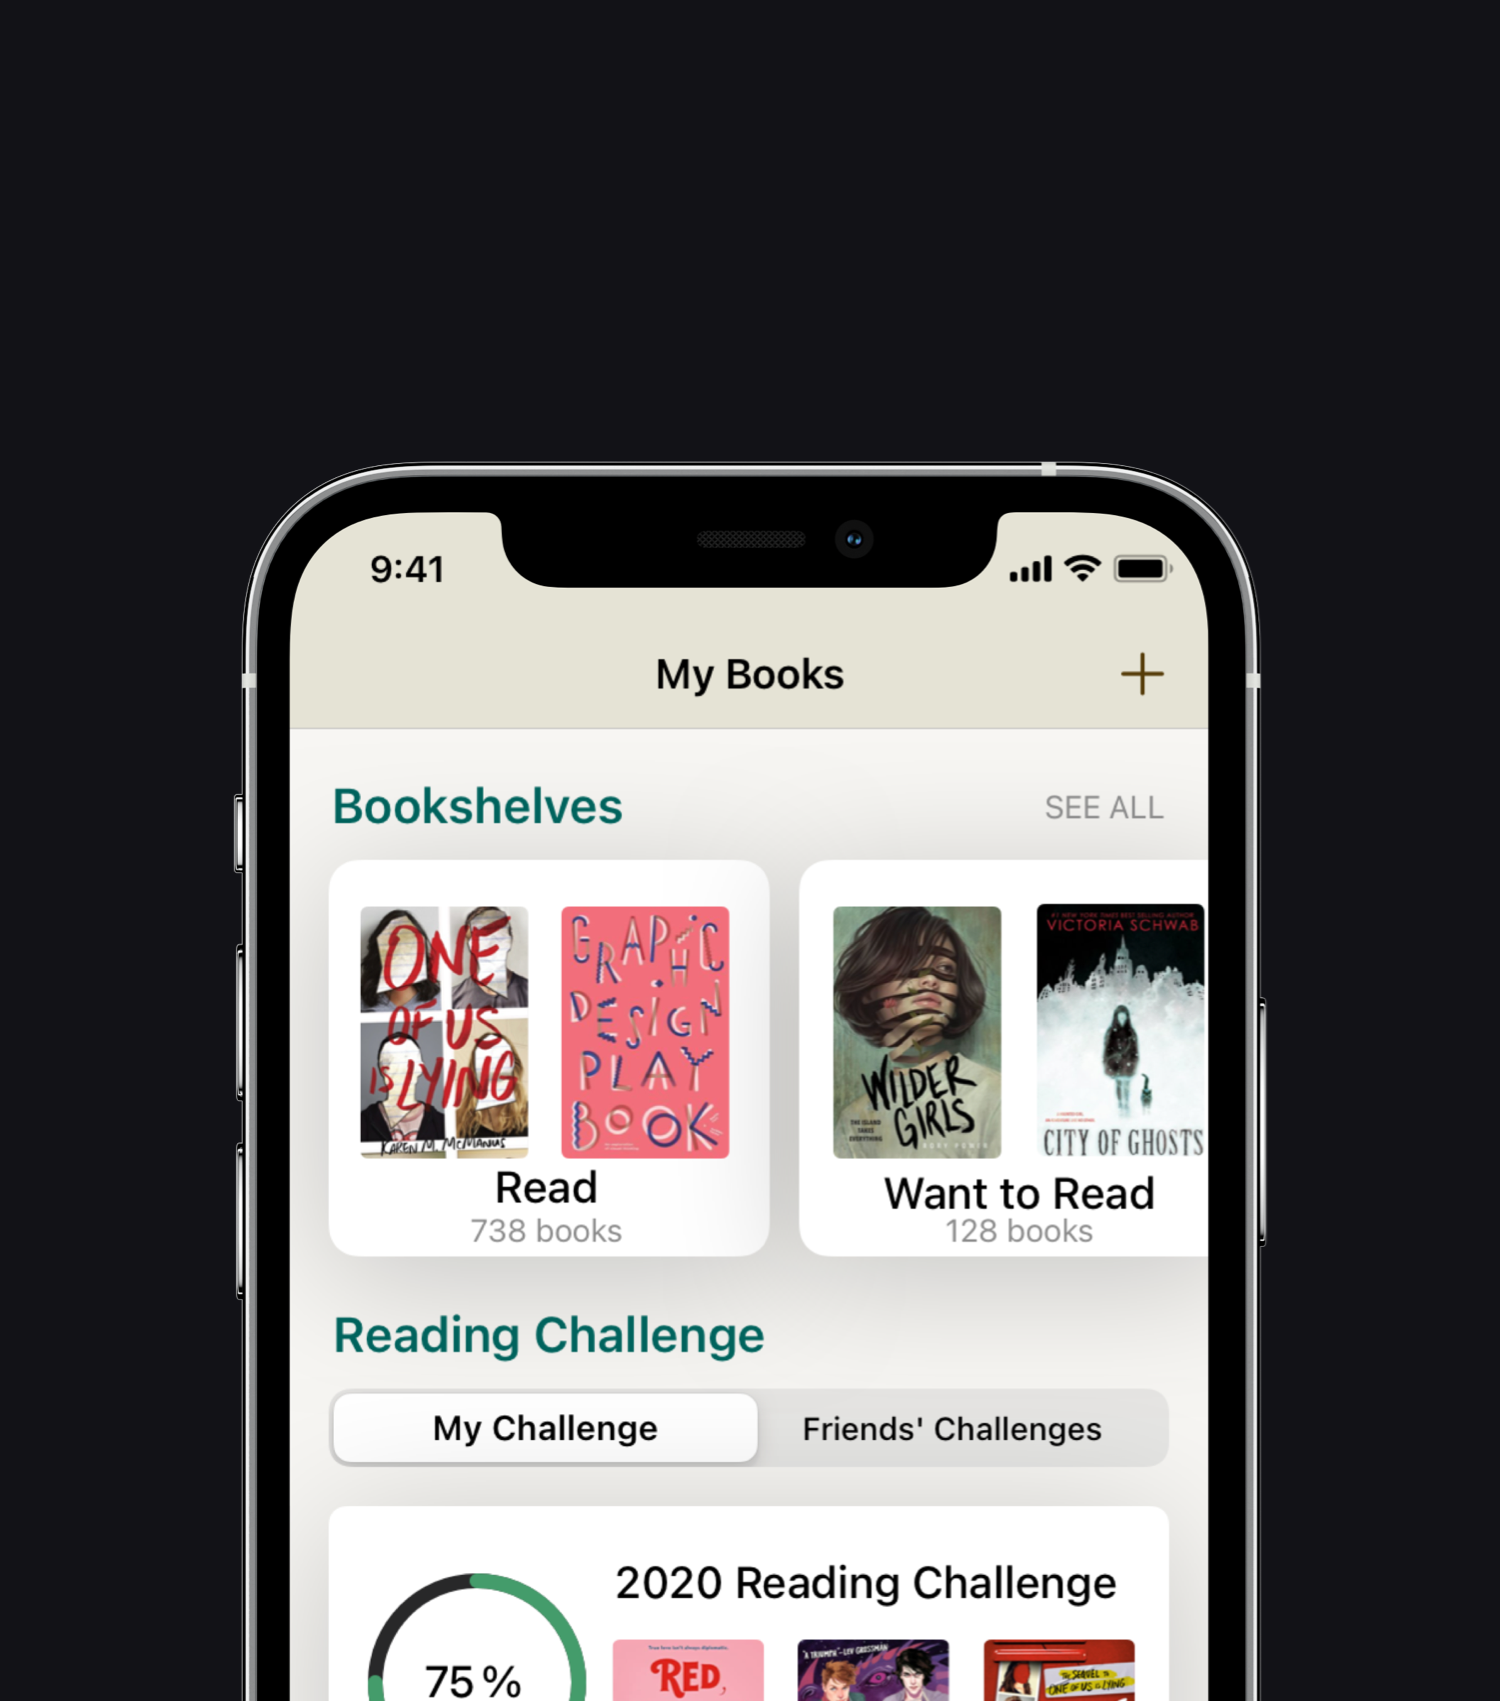 Redesign of the popular app Goodreads